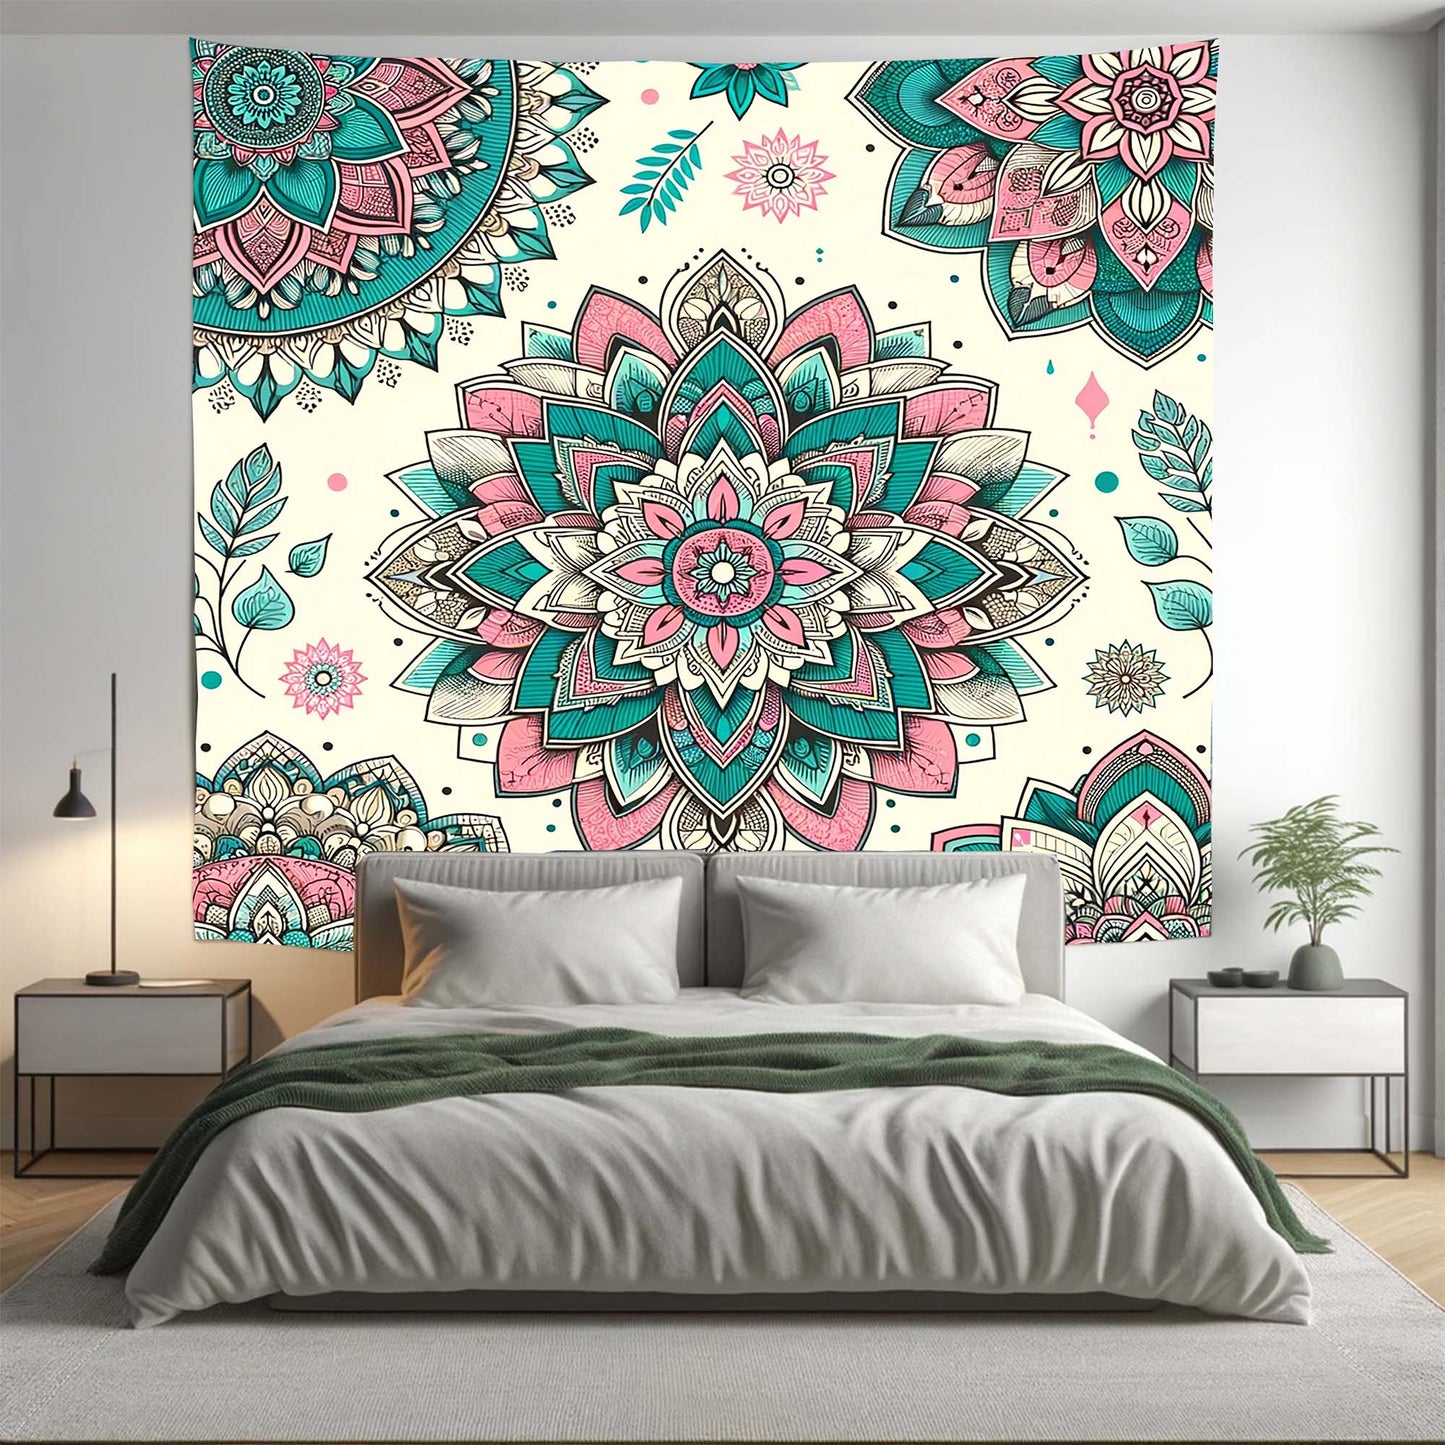 Bohemian Teal Beige Floral Mandala Tapestry Psychedelic Wall Hanging Boho Decor